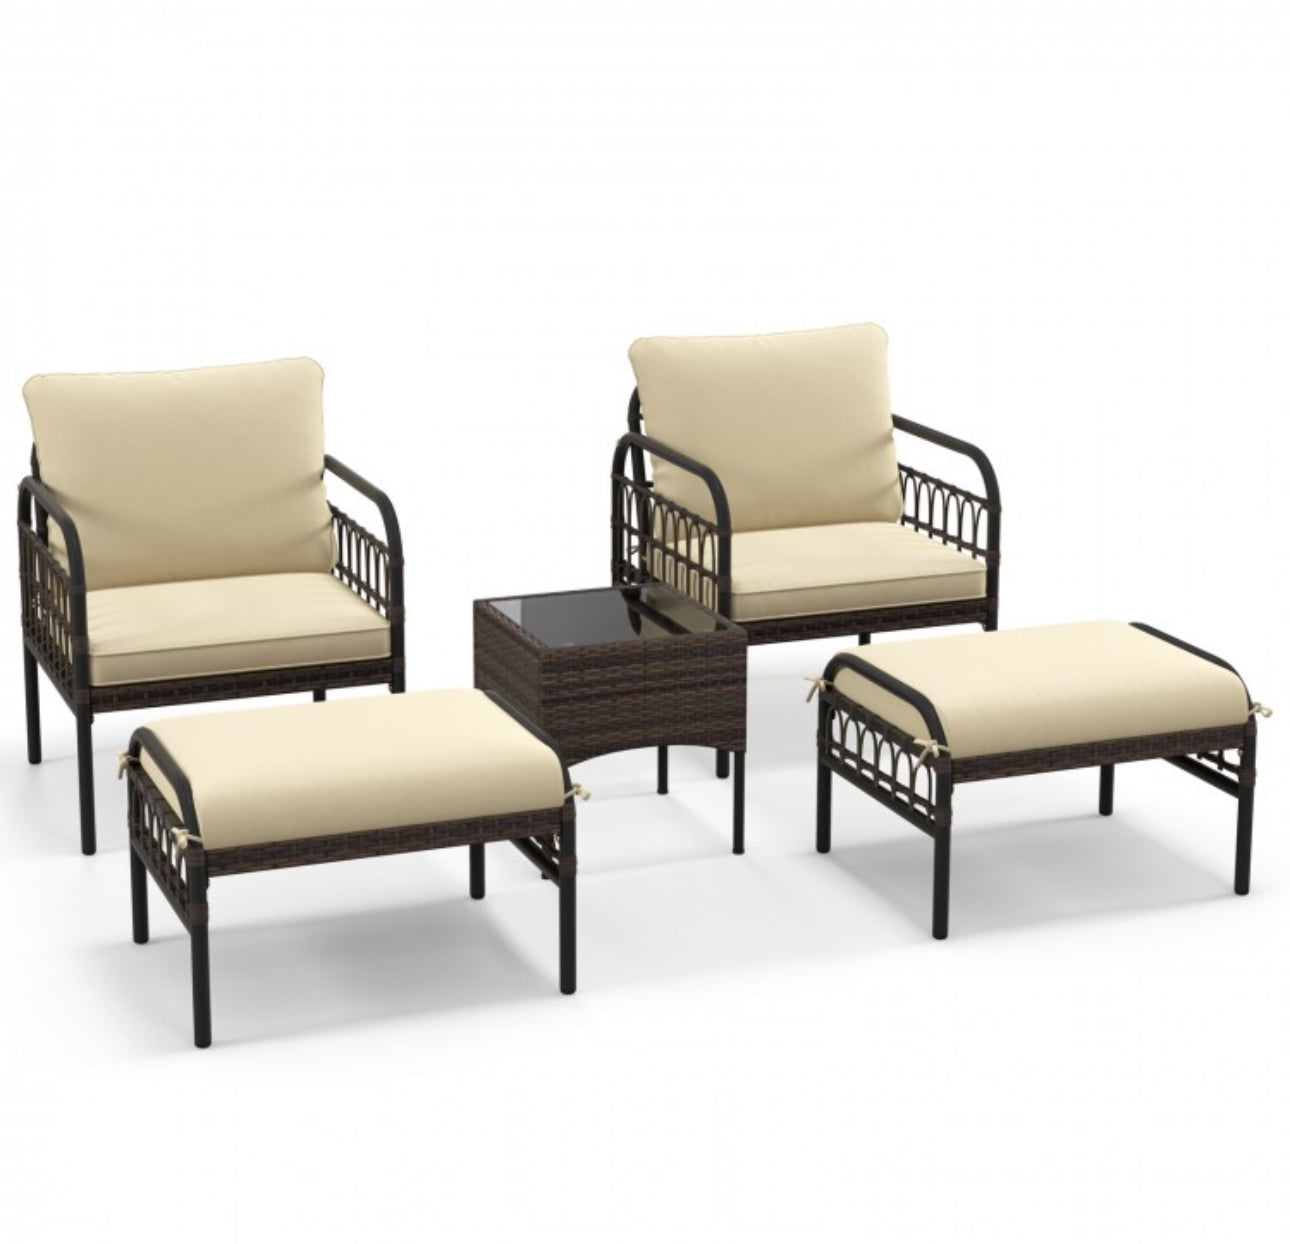 Very Relaxing Heavy Duty Beige 5-Piece Patio Rattan Conversation Set With Ottomans | Coffee Table | Comfy Cushions